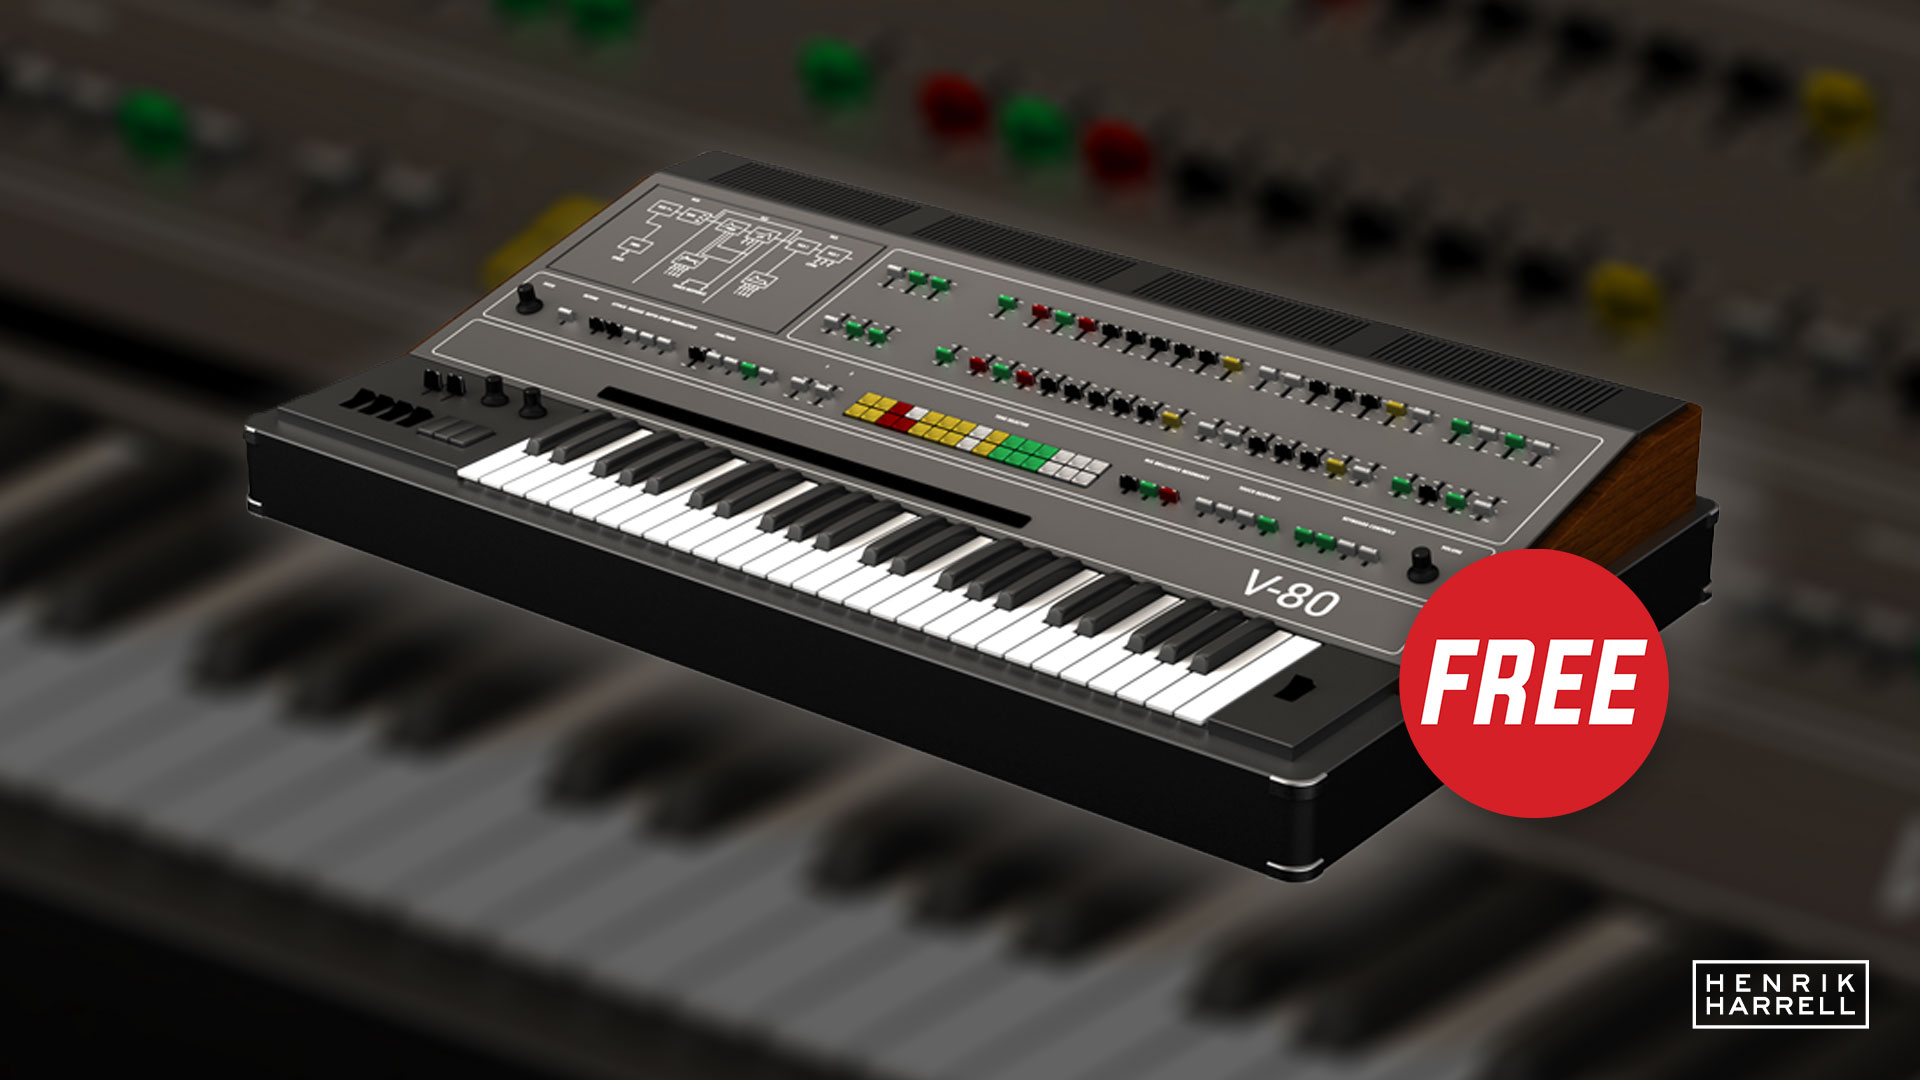 Free IK Multimedia Syntronik V-80 for a limited time